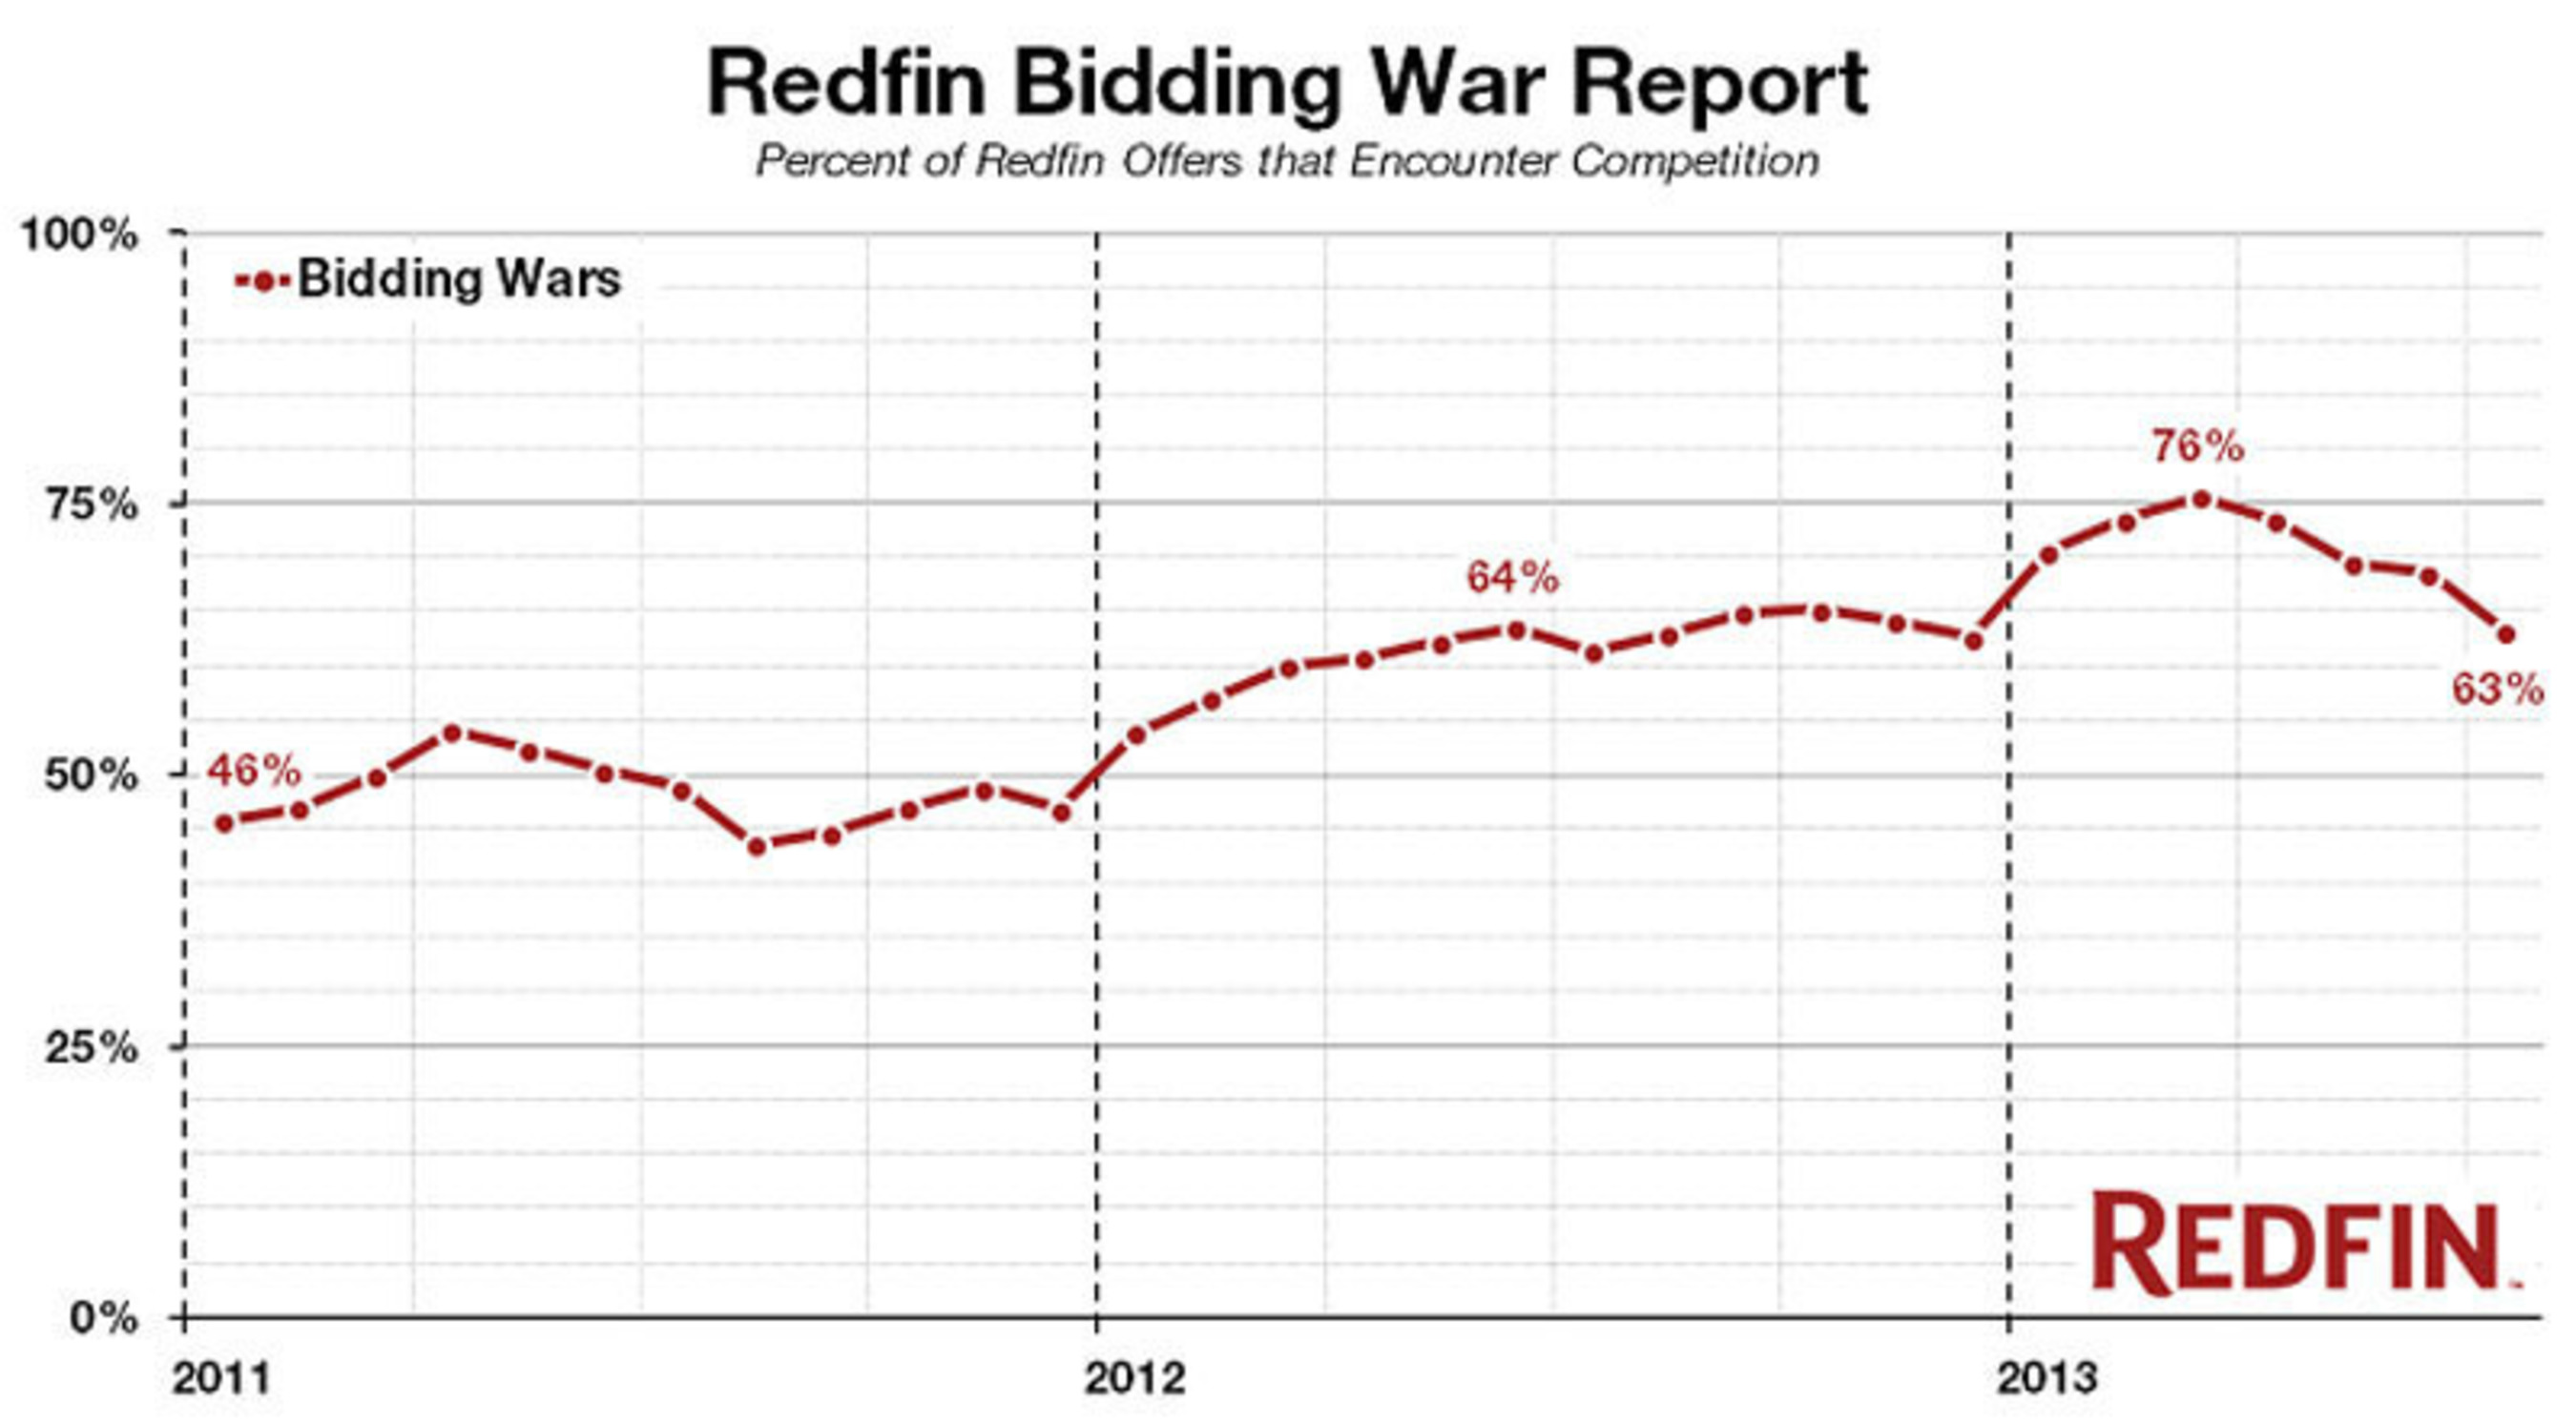 Real Estate Bidding Wars Continued to Tumble in July as Housing Market Rebalances, According to Redfin Report. (PRNewsFoto/Redfin) (PRNewsFoto/REDFIN)